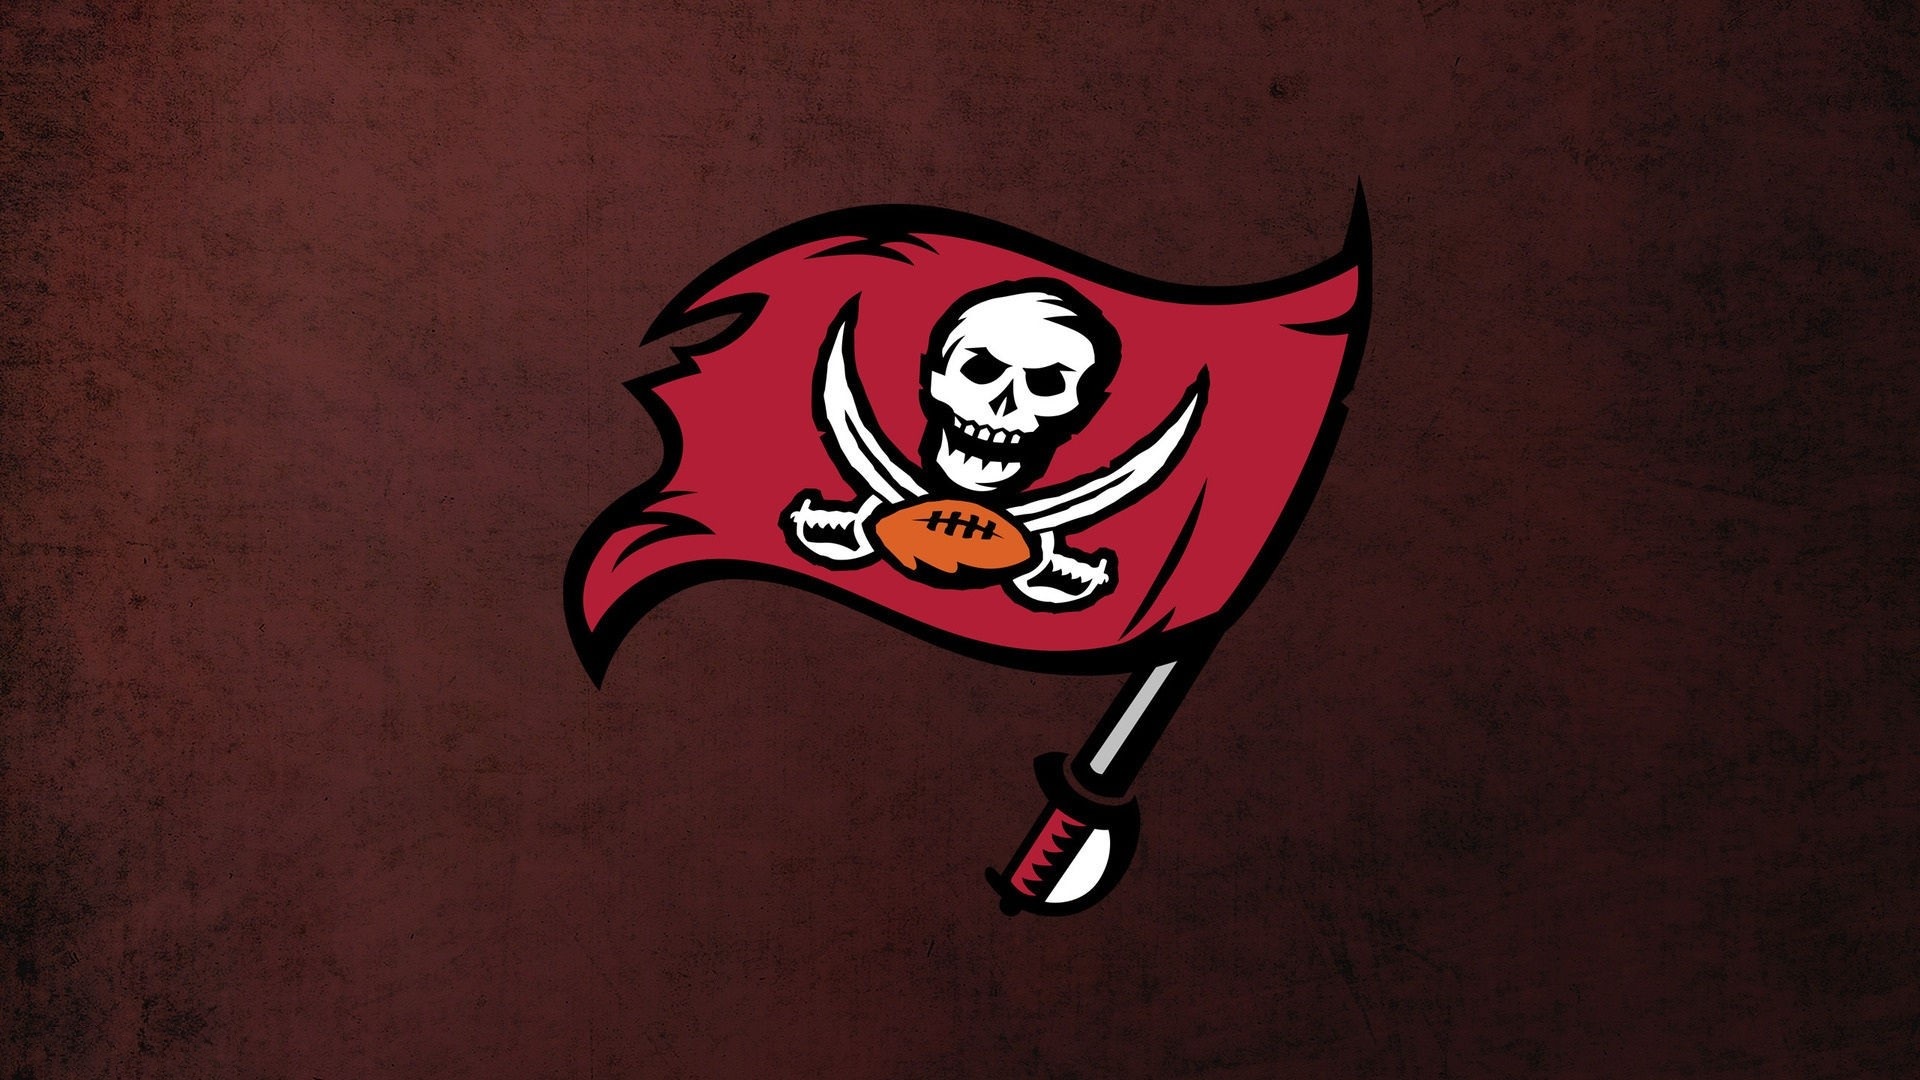 Wallpapers HD Tampa Bay Buccaneers Logo with high-resolution 1920x1080 pixel. You can use this wallpaper for your Mac or Windows Desktop Background, iPhone, Android or Tablet and another Smartphone device